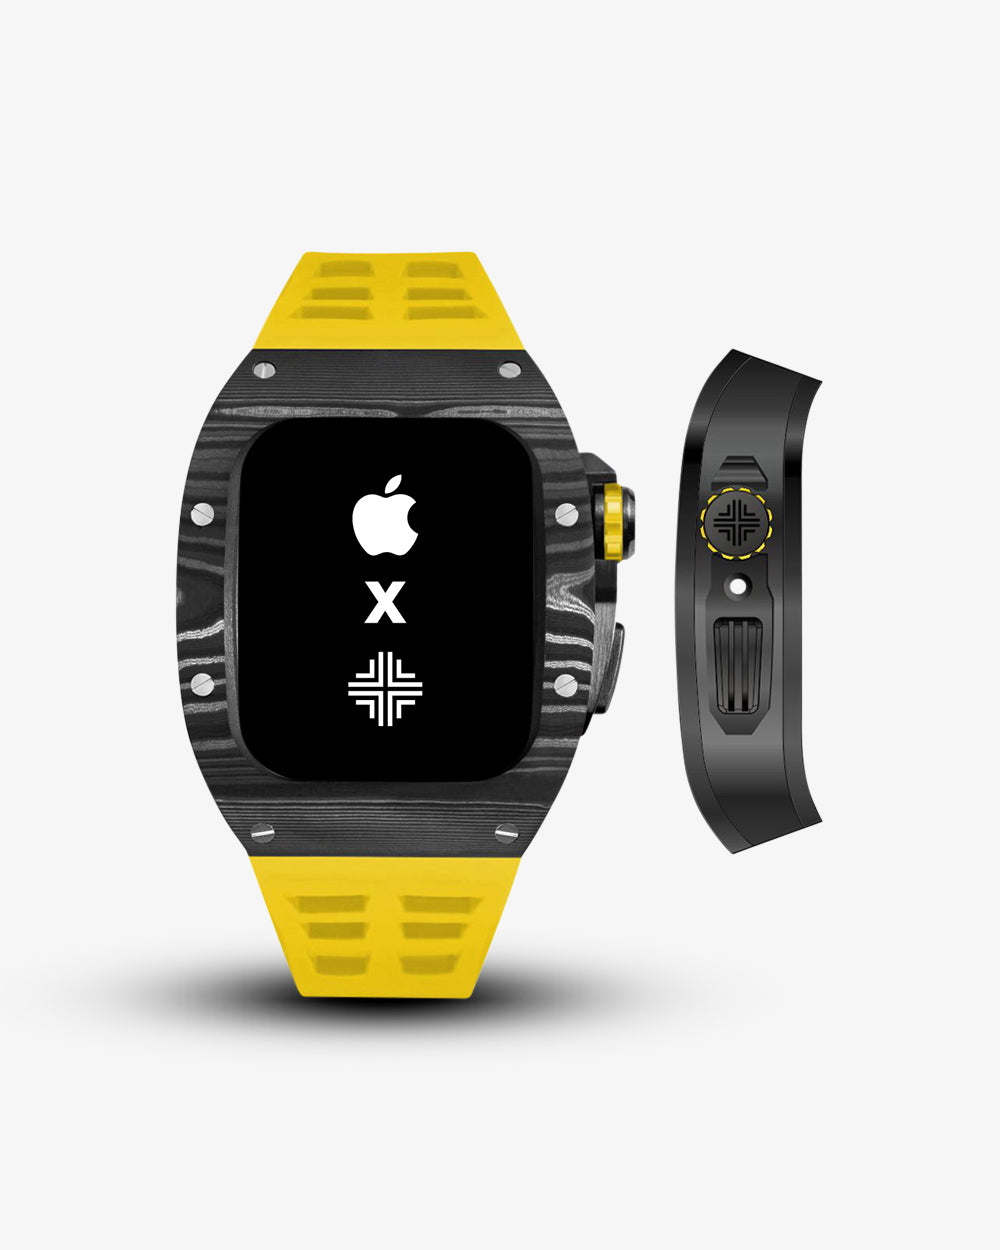 Swiss Concept Racing Elite Edition Nero Forged Carbon, Matte Black & Modena Yellow Apple Watch Case - Precision Engineered